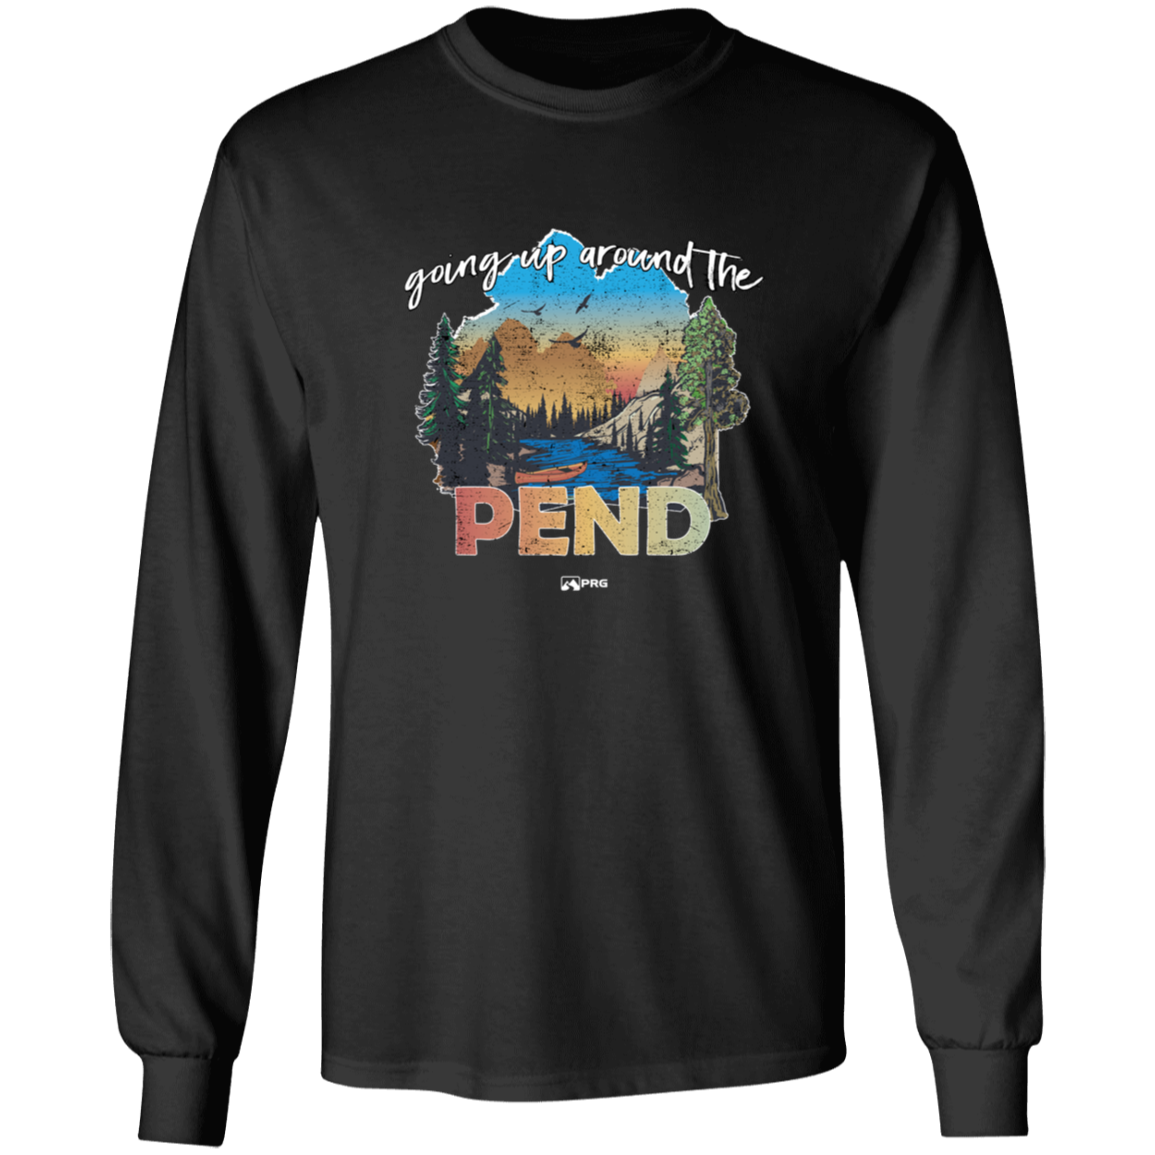 Around the Pend - Long Sleeve